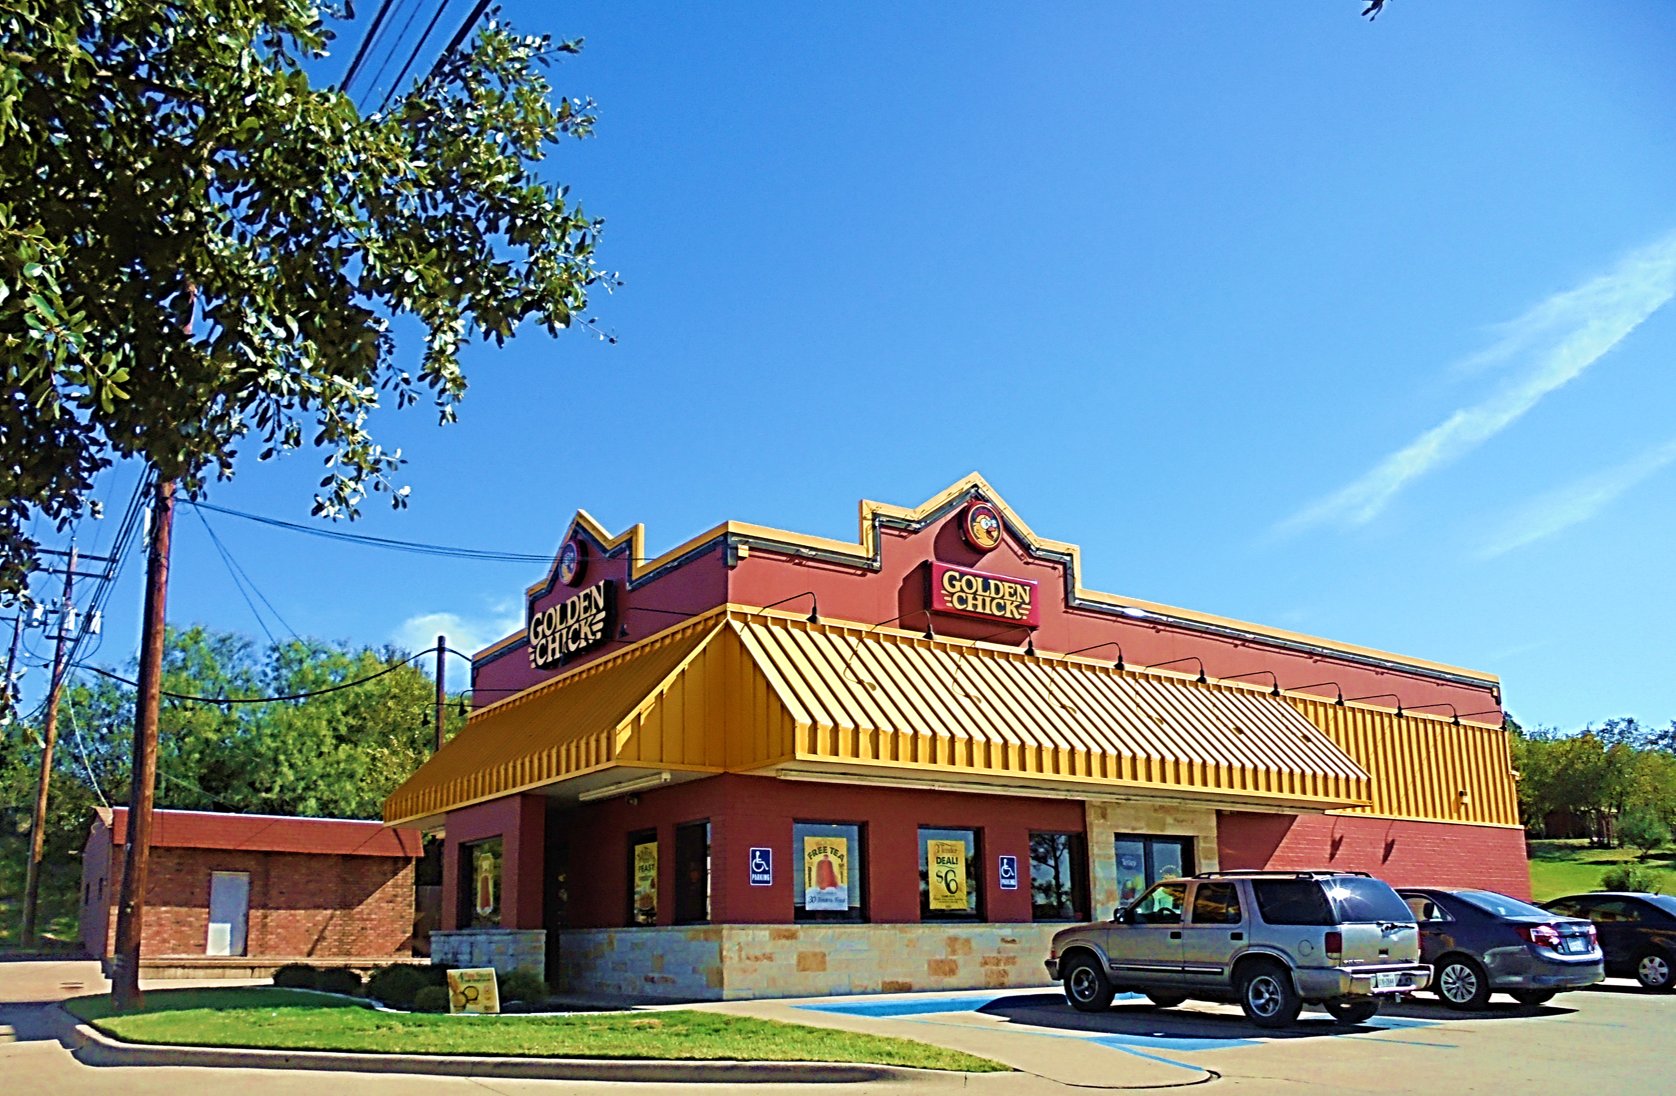 Golden Chick storefront.  Your local Golden Chick fast food restaurant in Wichita Falls, Texas